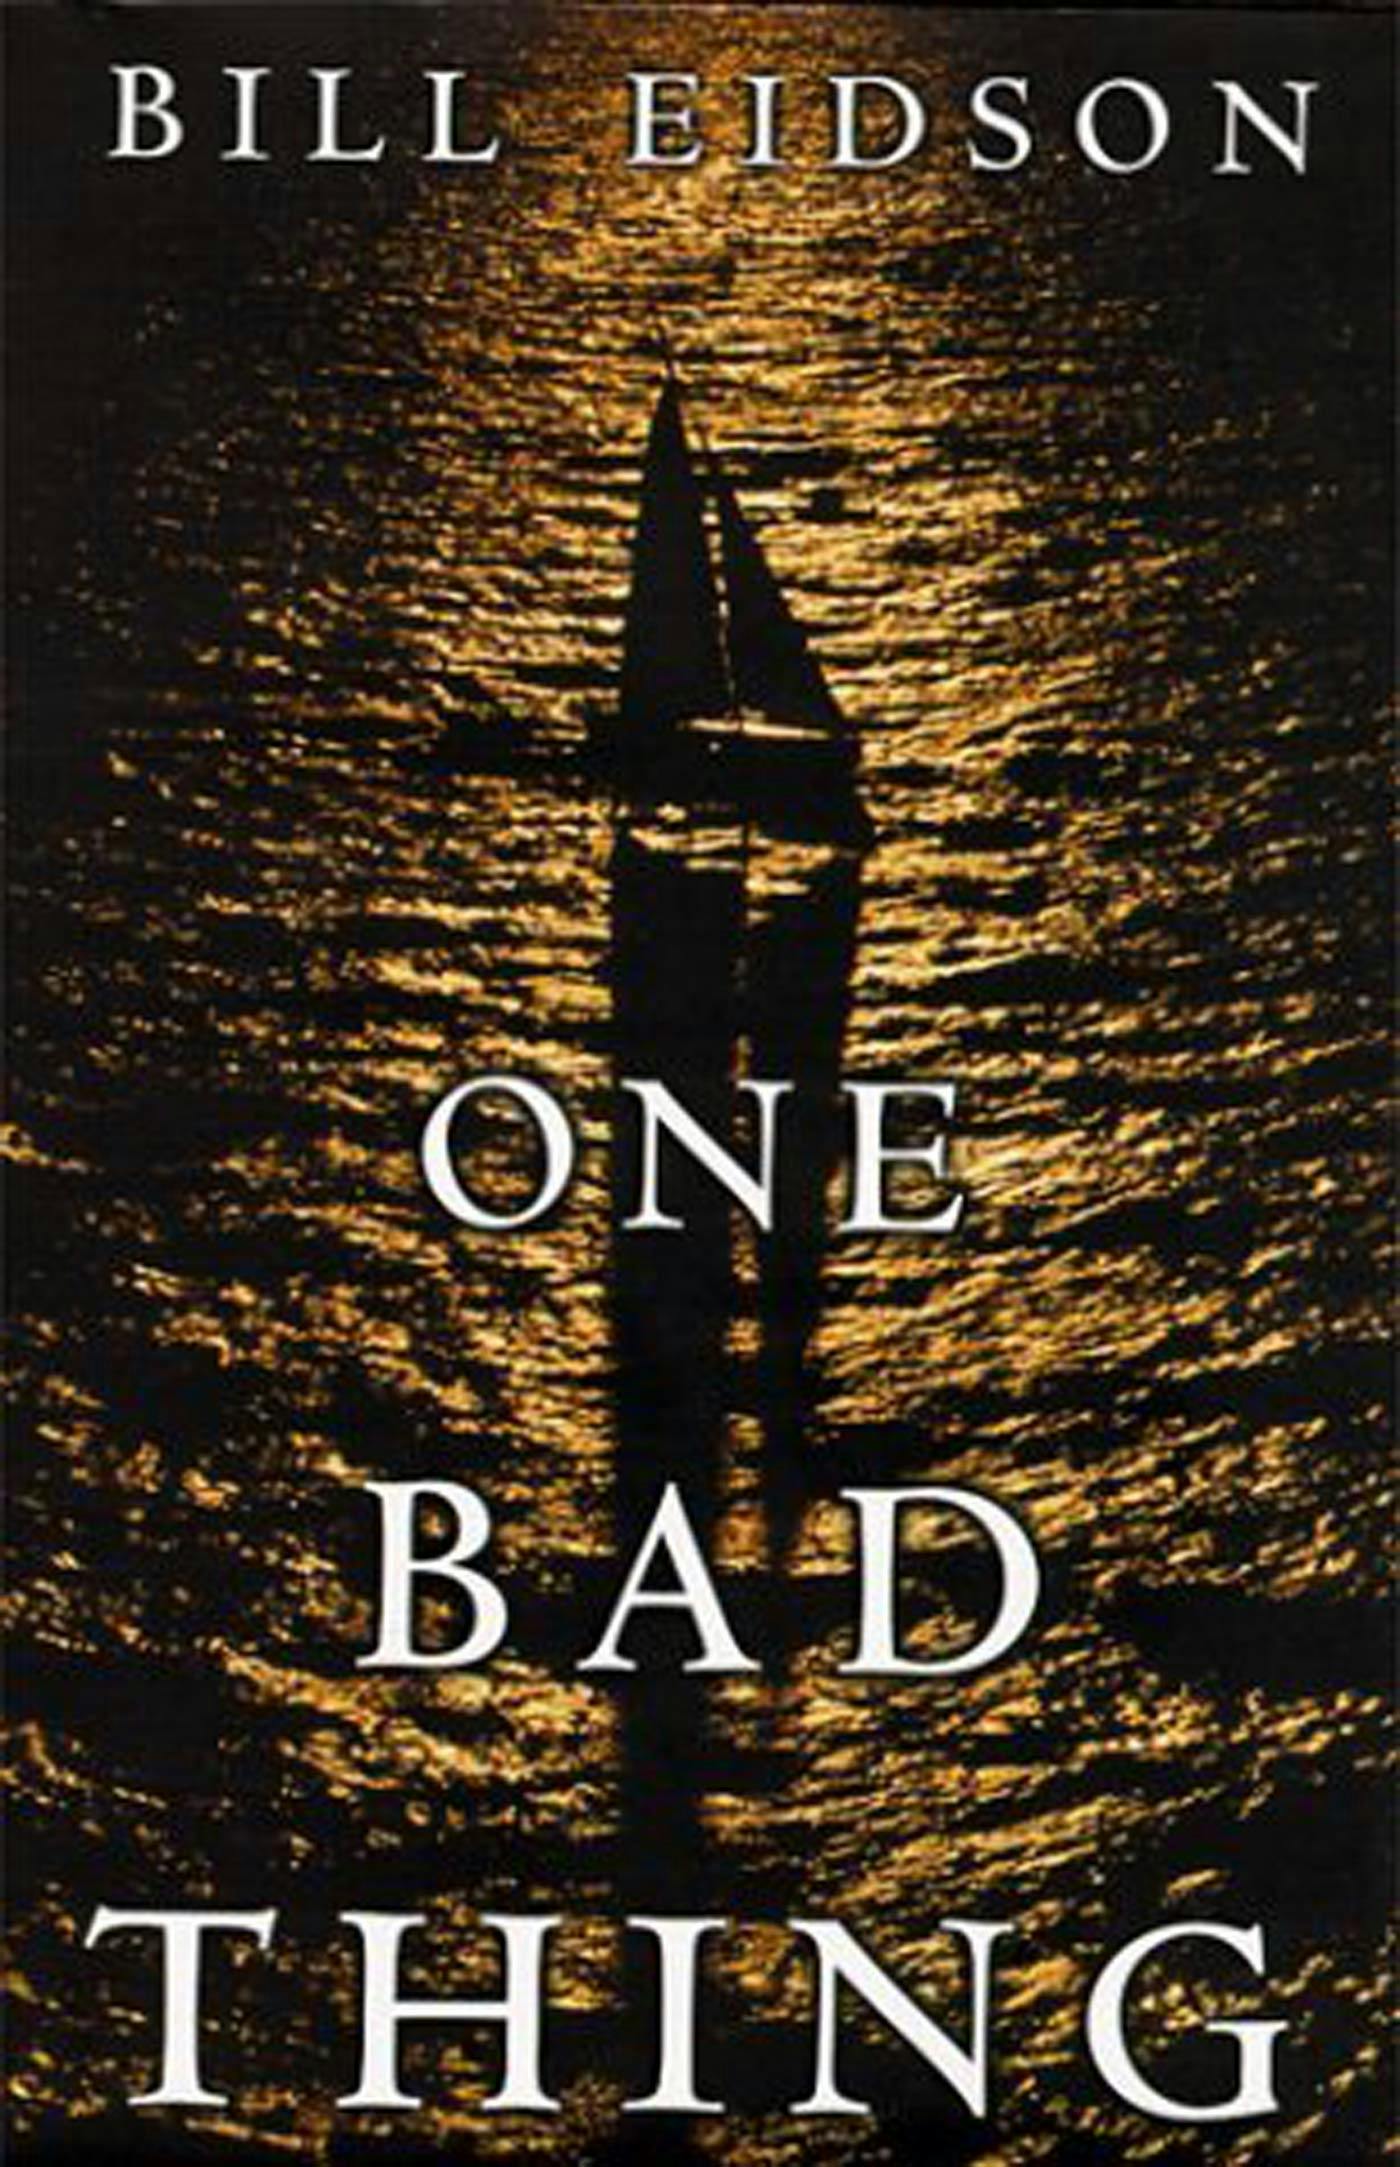 Cover for the book titled as: One Bad Thing